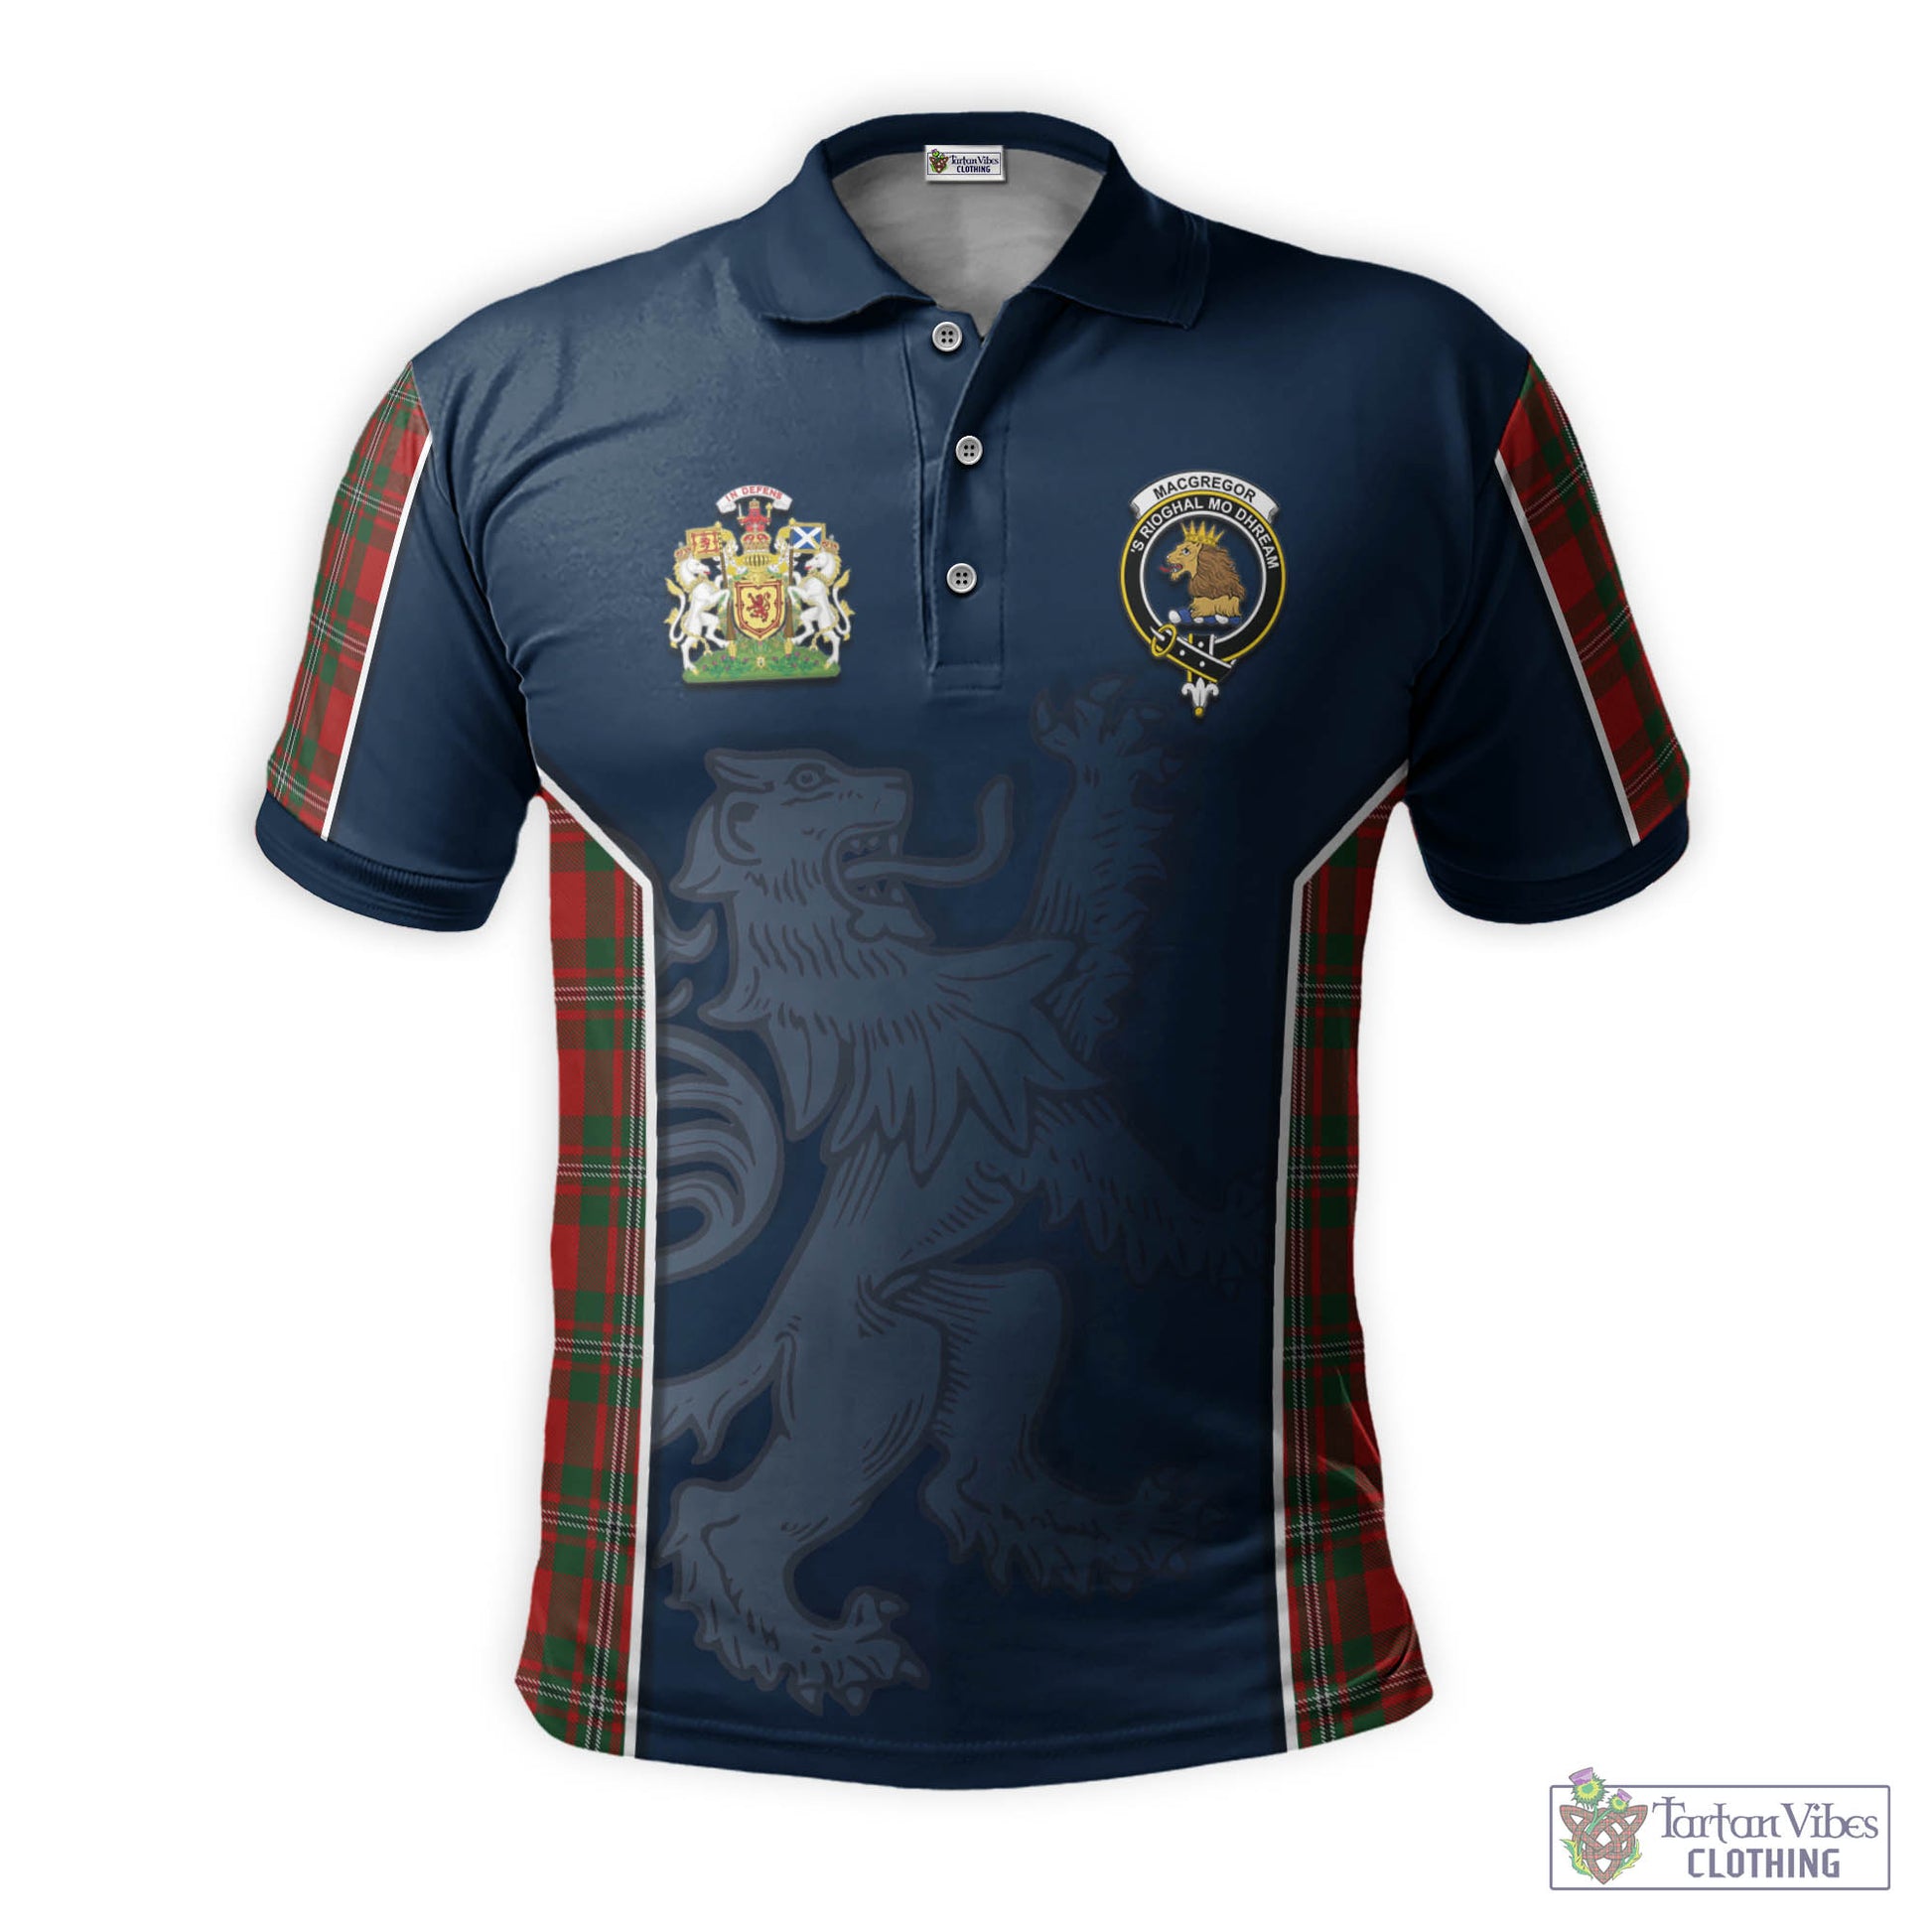 Tartan Vibes Clothing MacGregor Tartan Men's Polo Shirt with Family Crest and Lion Rampant Vibes Sport Style